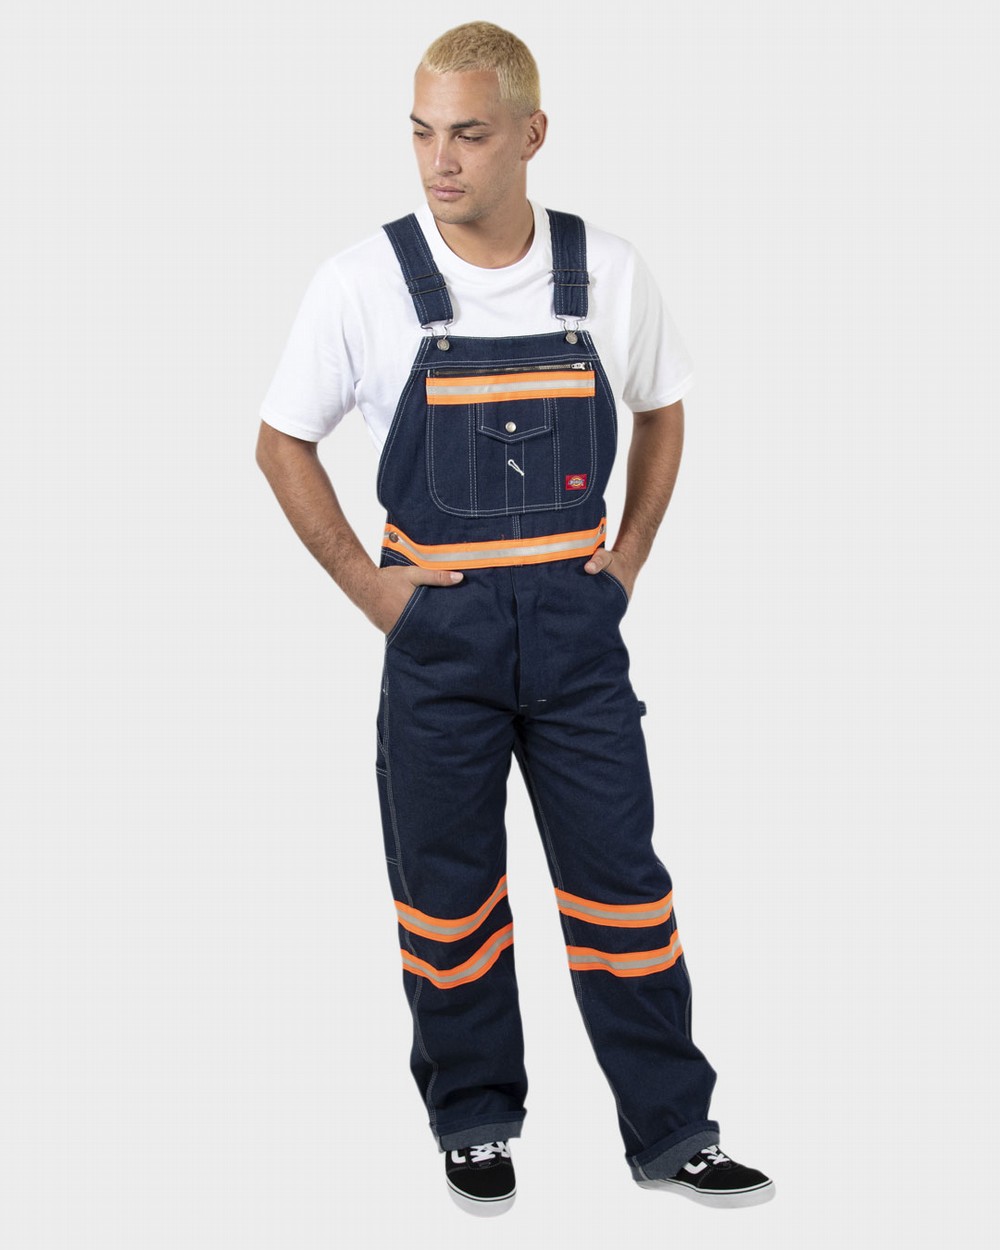 Round House Overalls since 1903 Bib Overalls – Round House American Made  Jeans Made in USA Overalls, Workwear